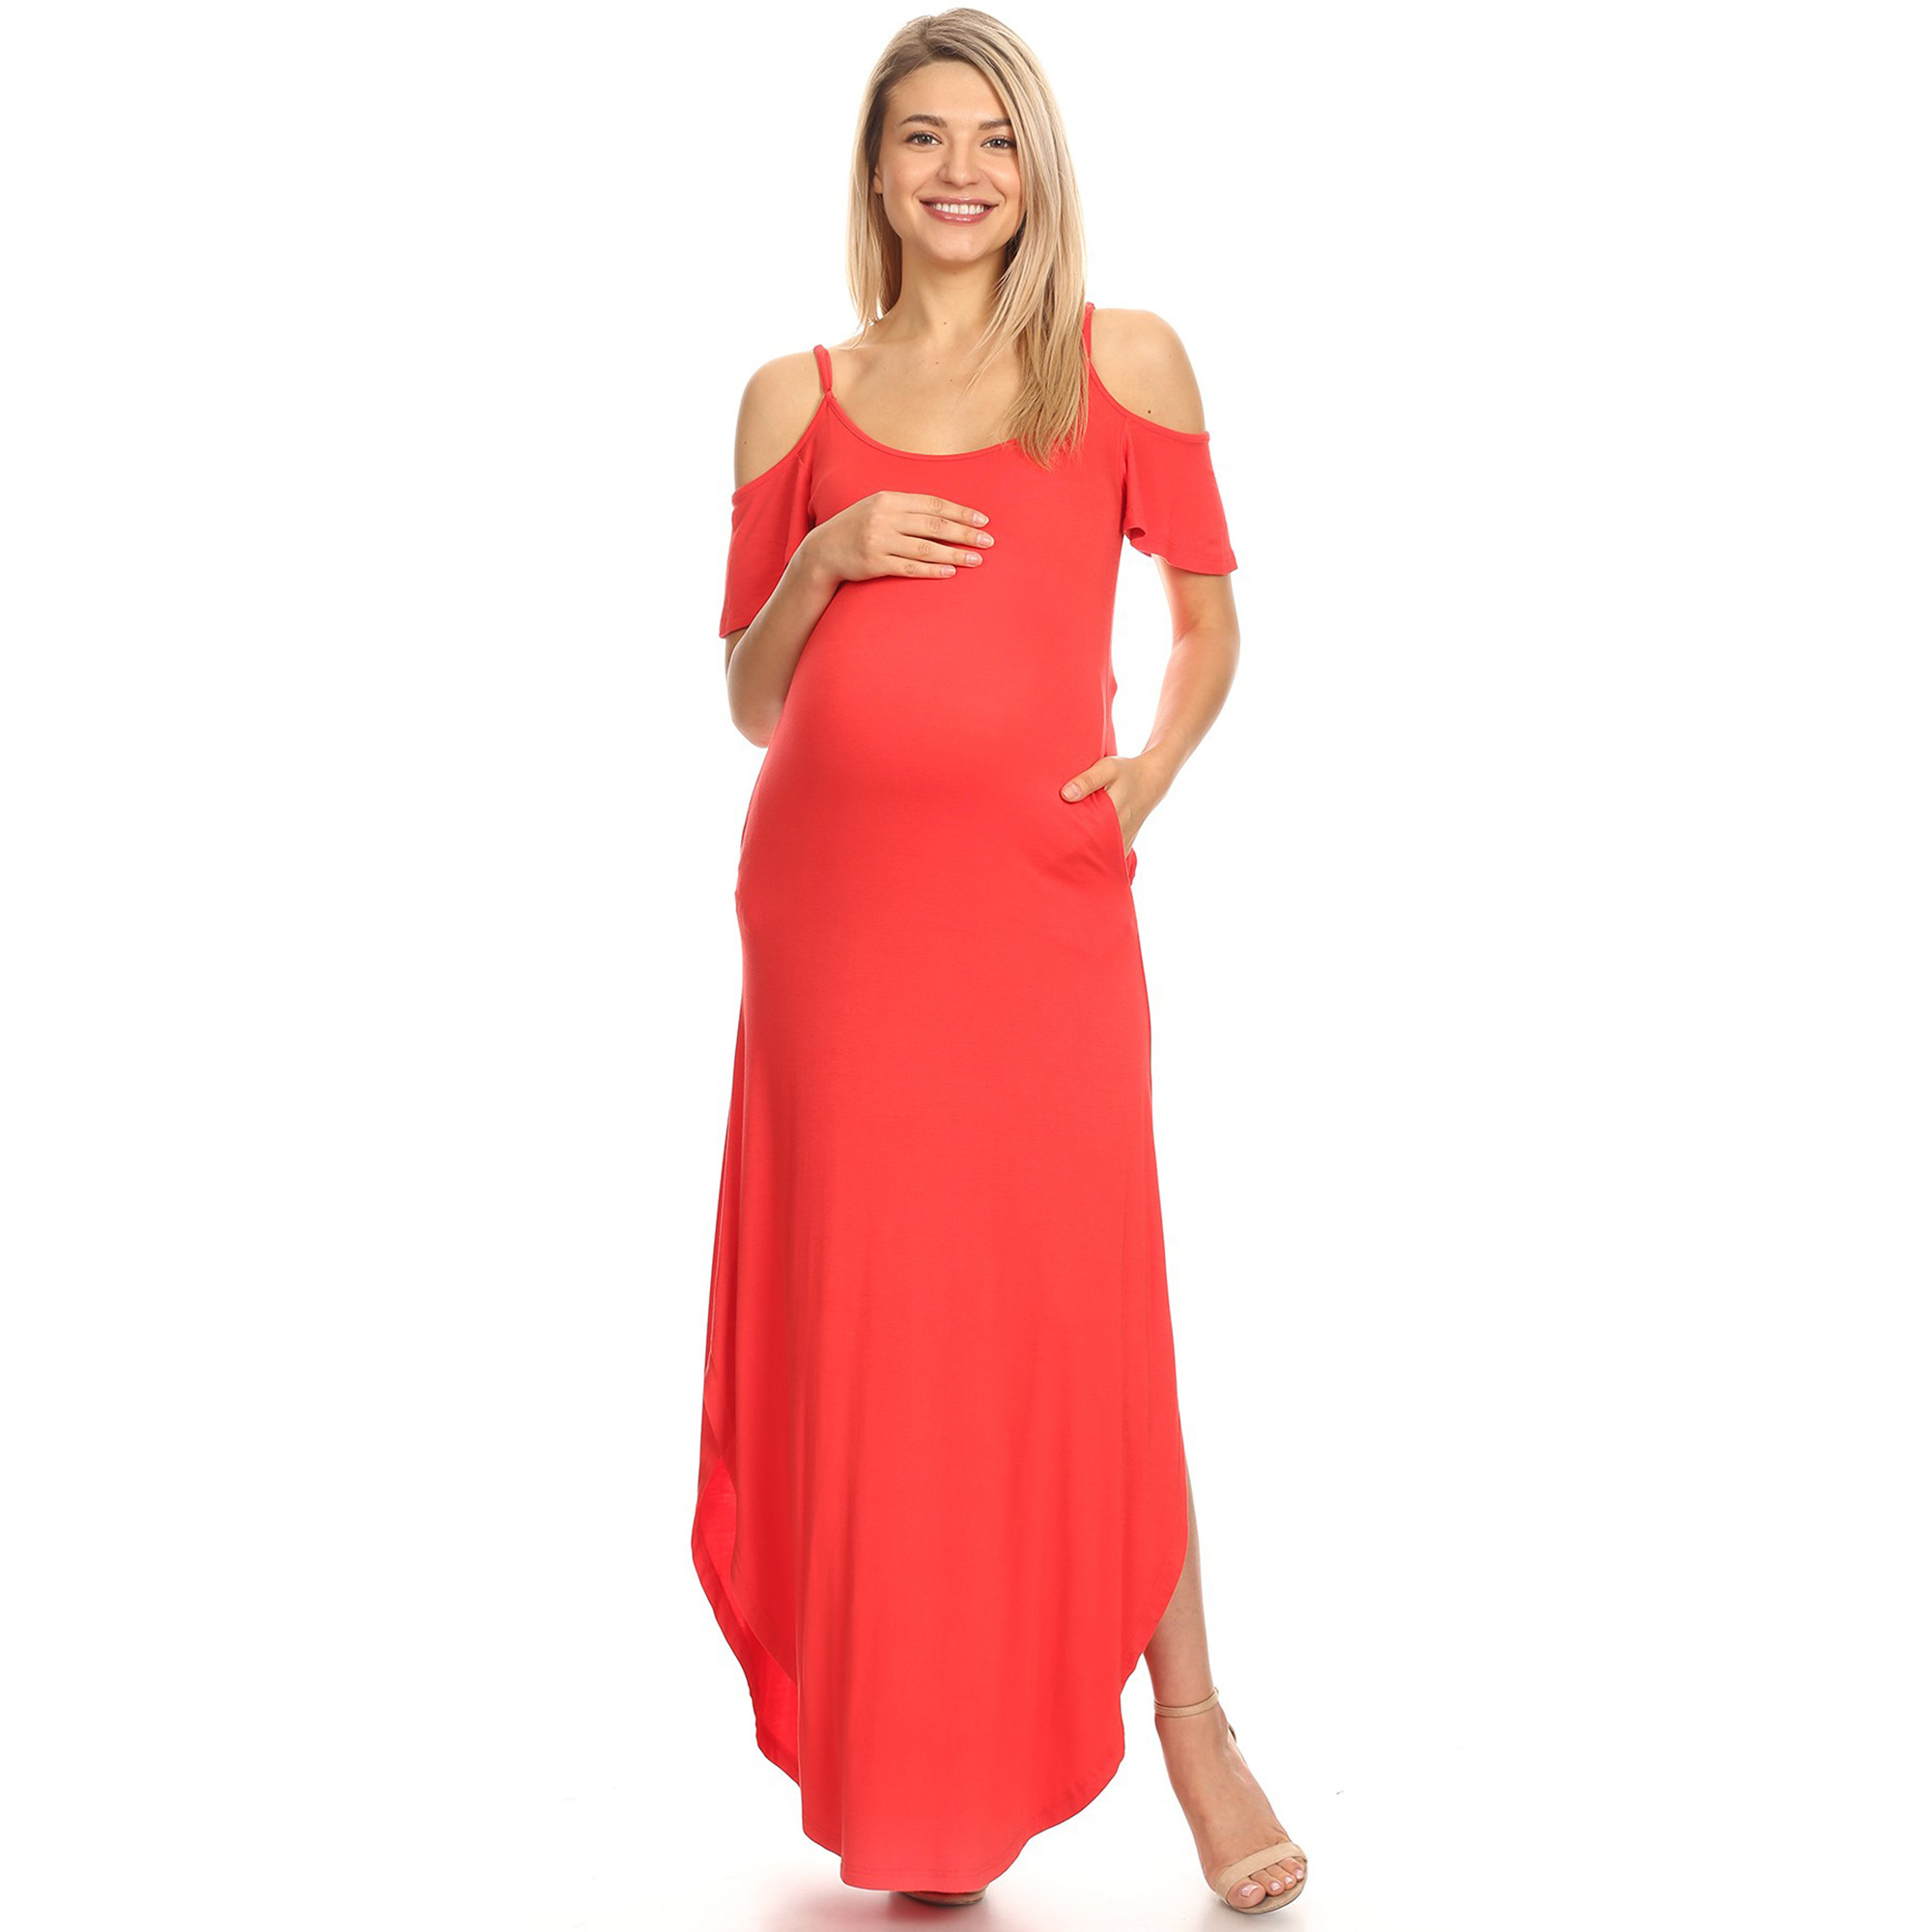 White Mark Women's Maternity Cold Shoulder Maxi Dress - Red, Small